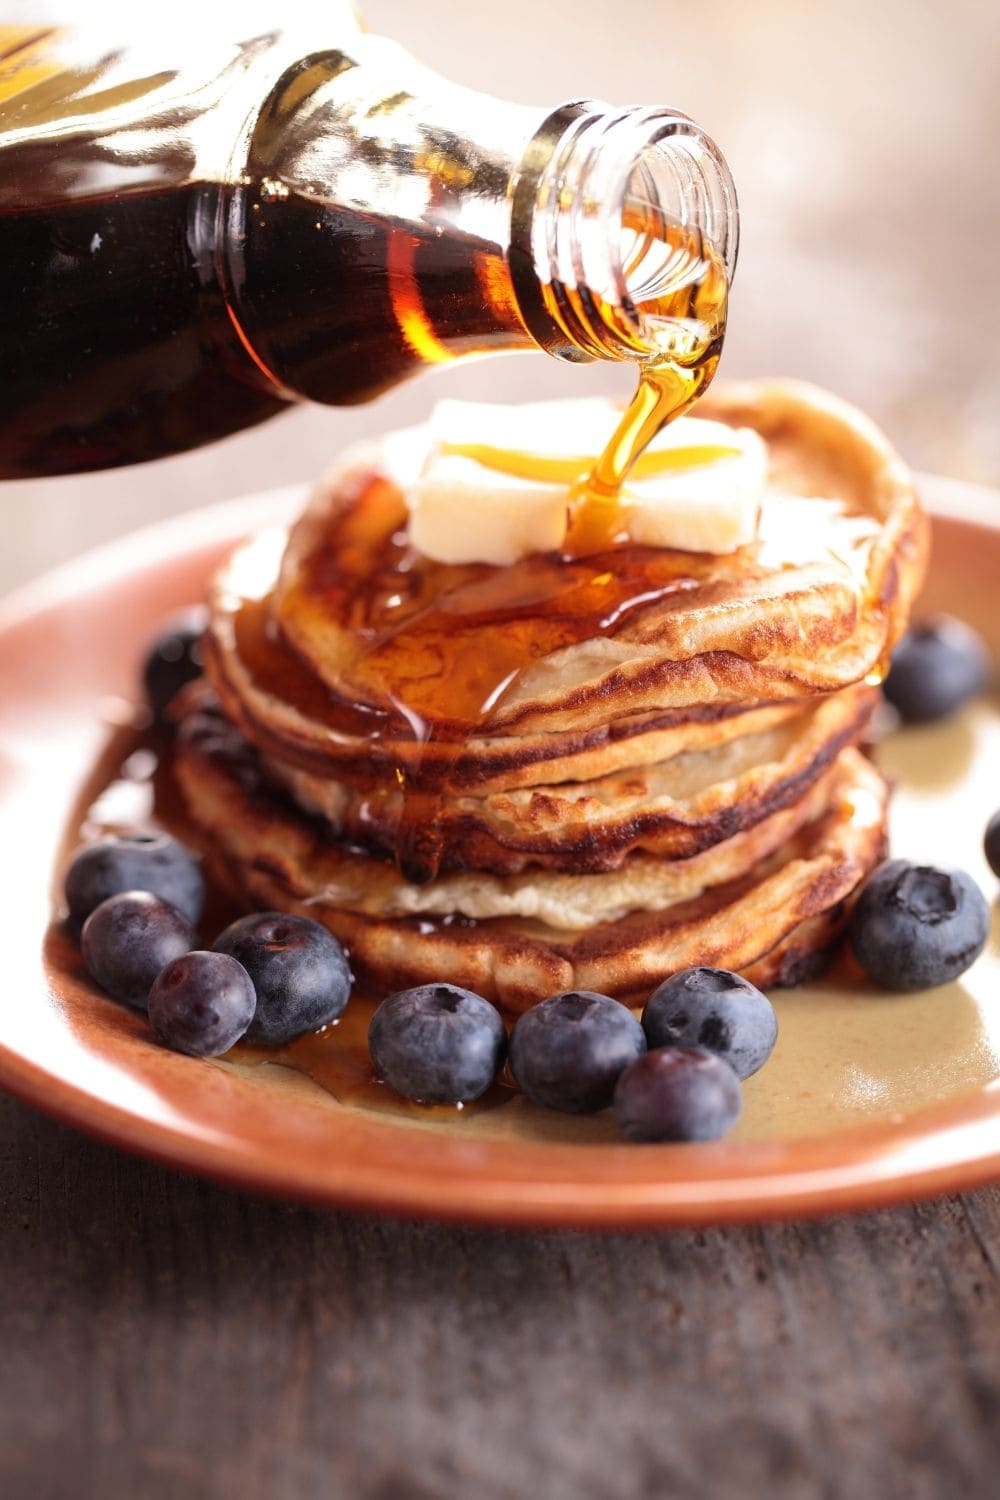 Homemade Pancakes with Bananas, Blueberries and Maple Syrup